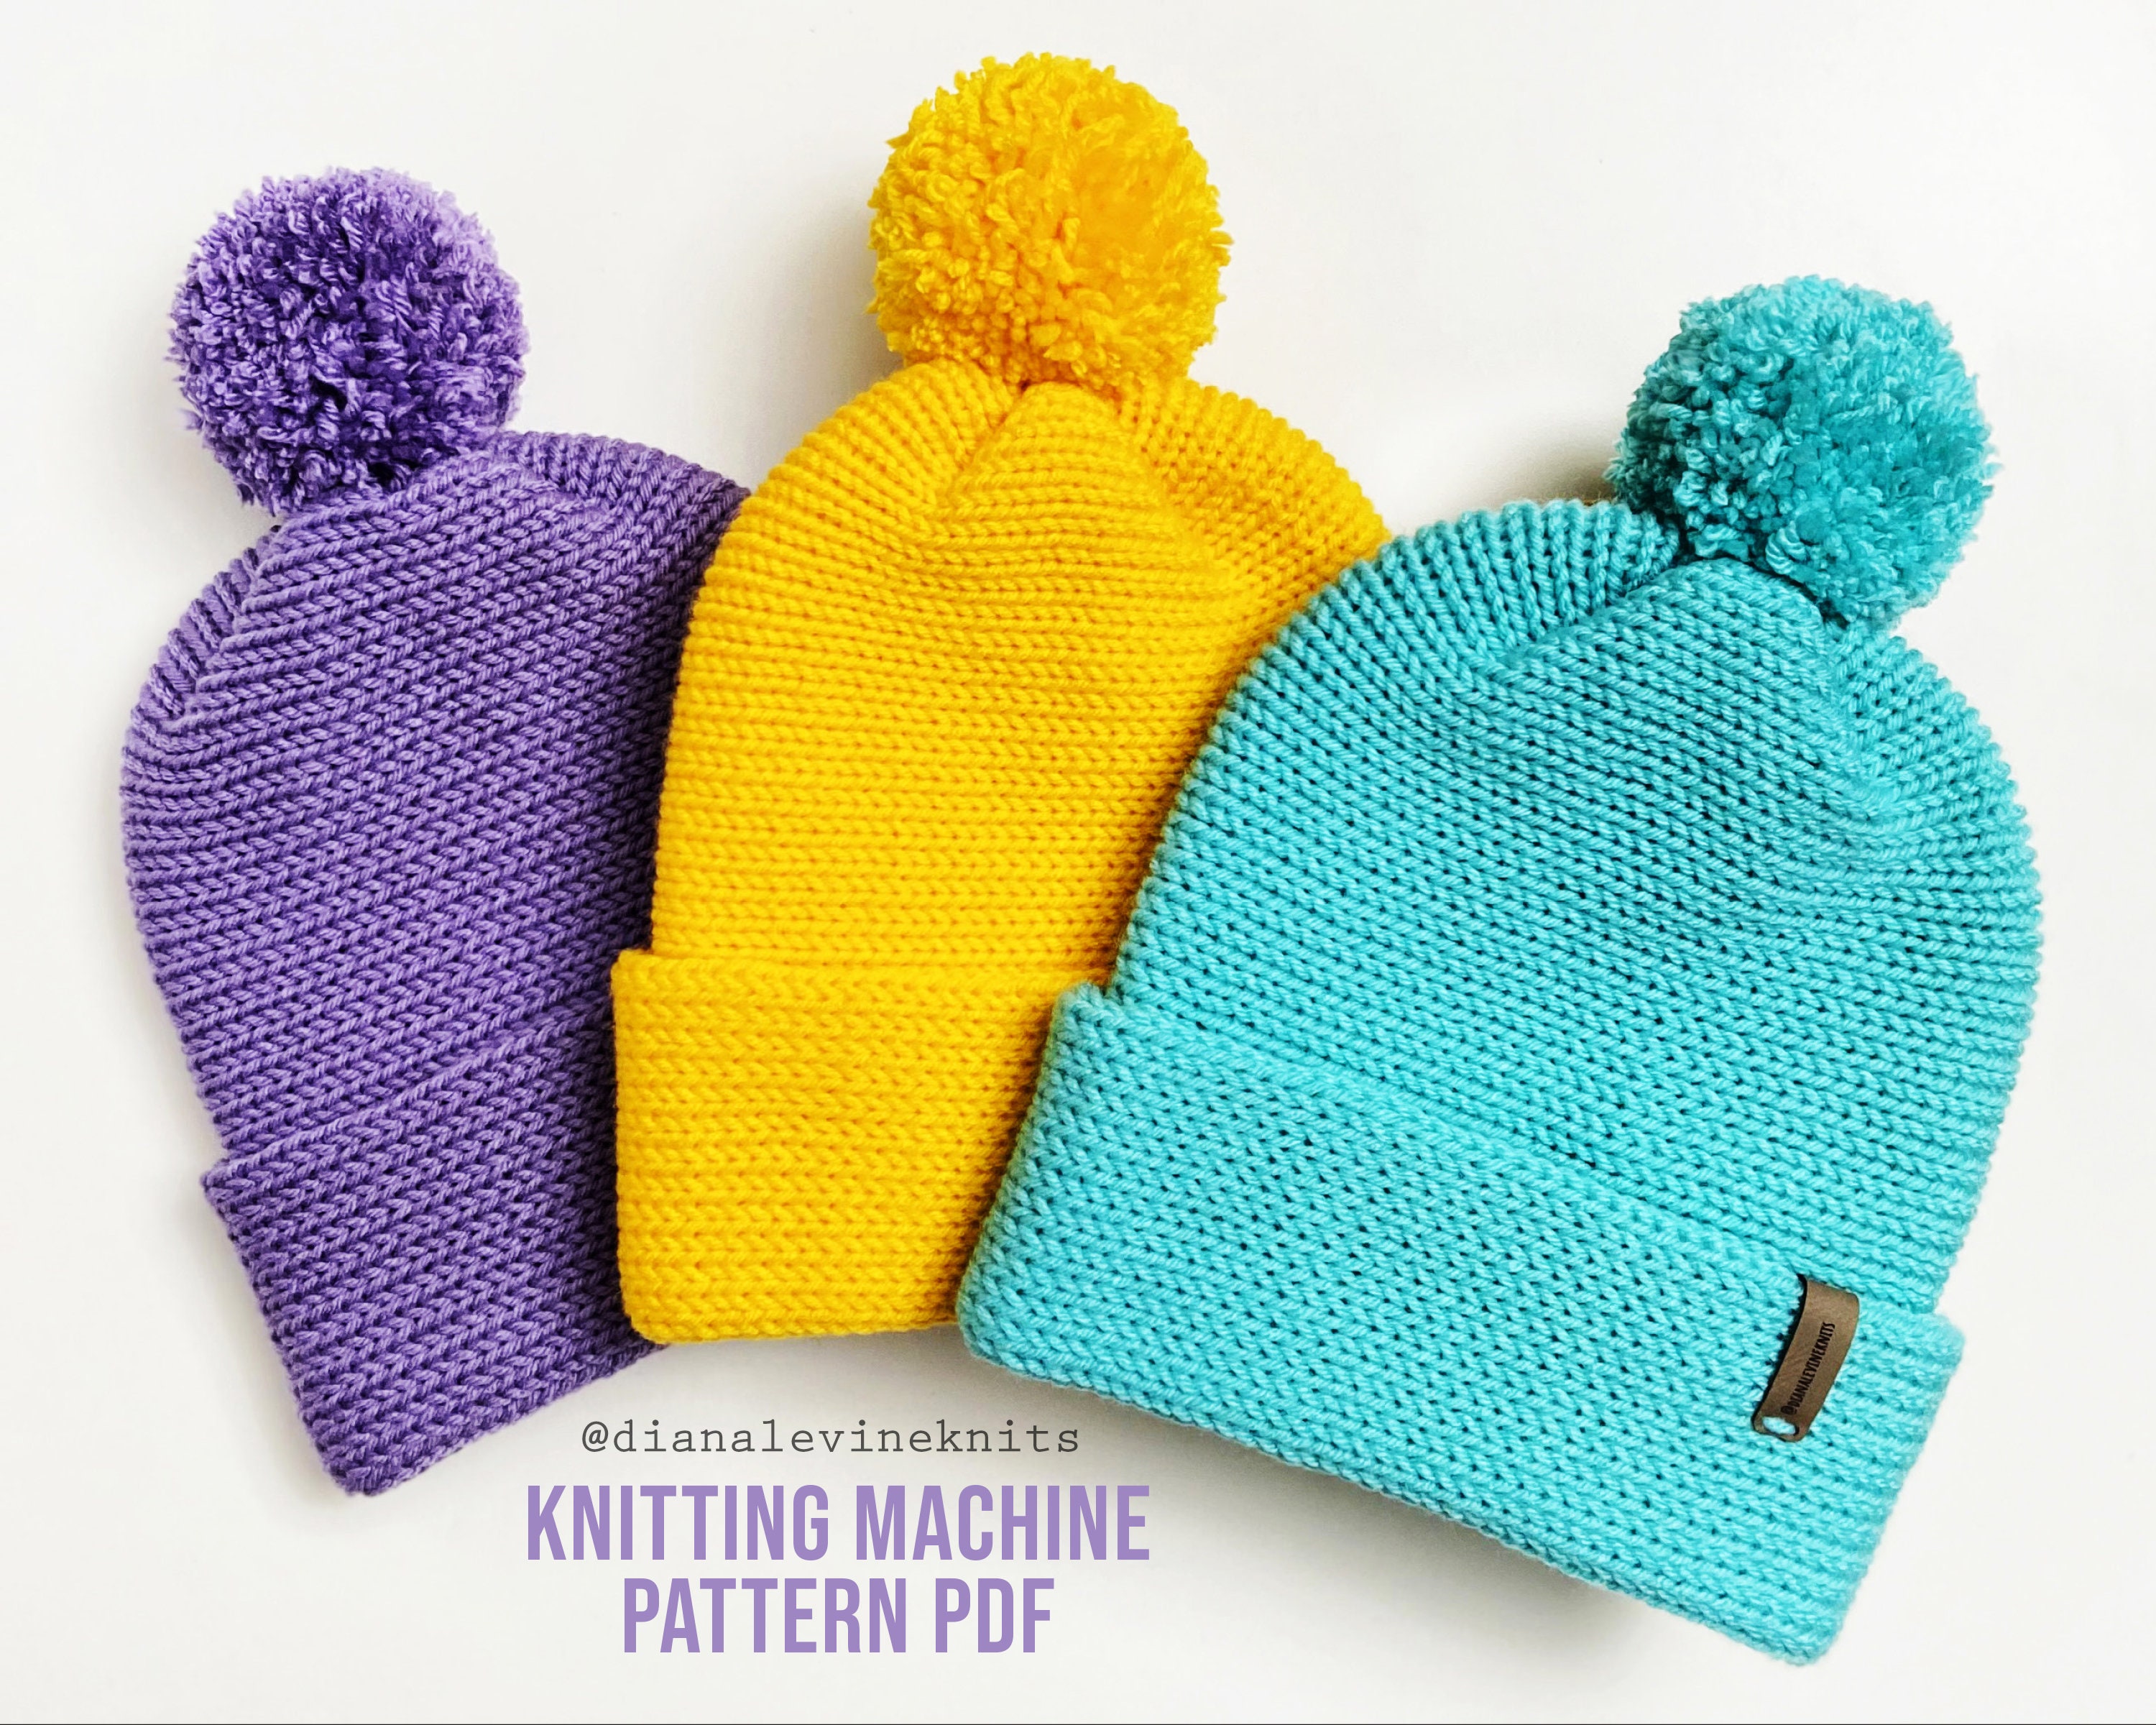 How to Always knit perfect with your circular knitting machine. 